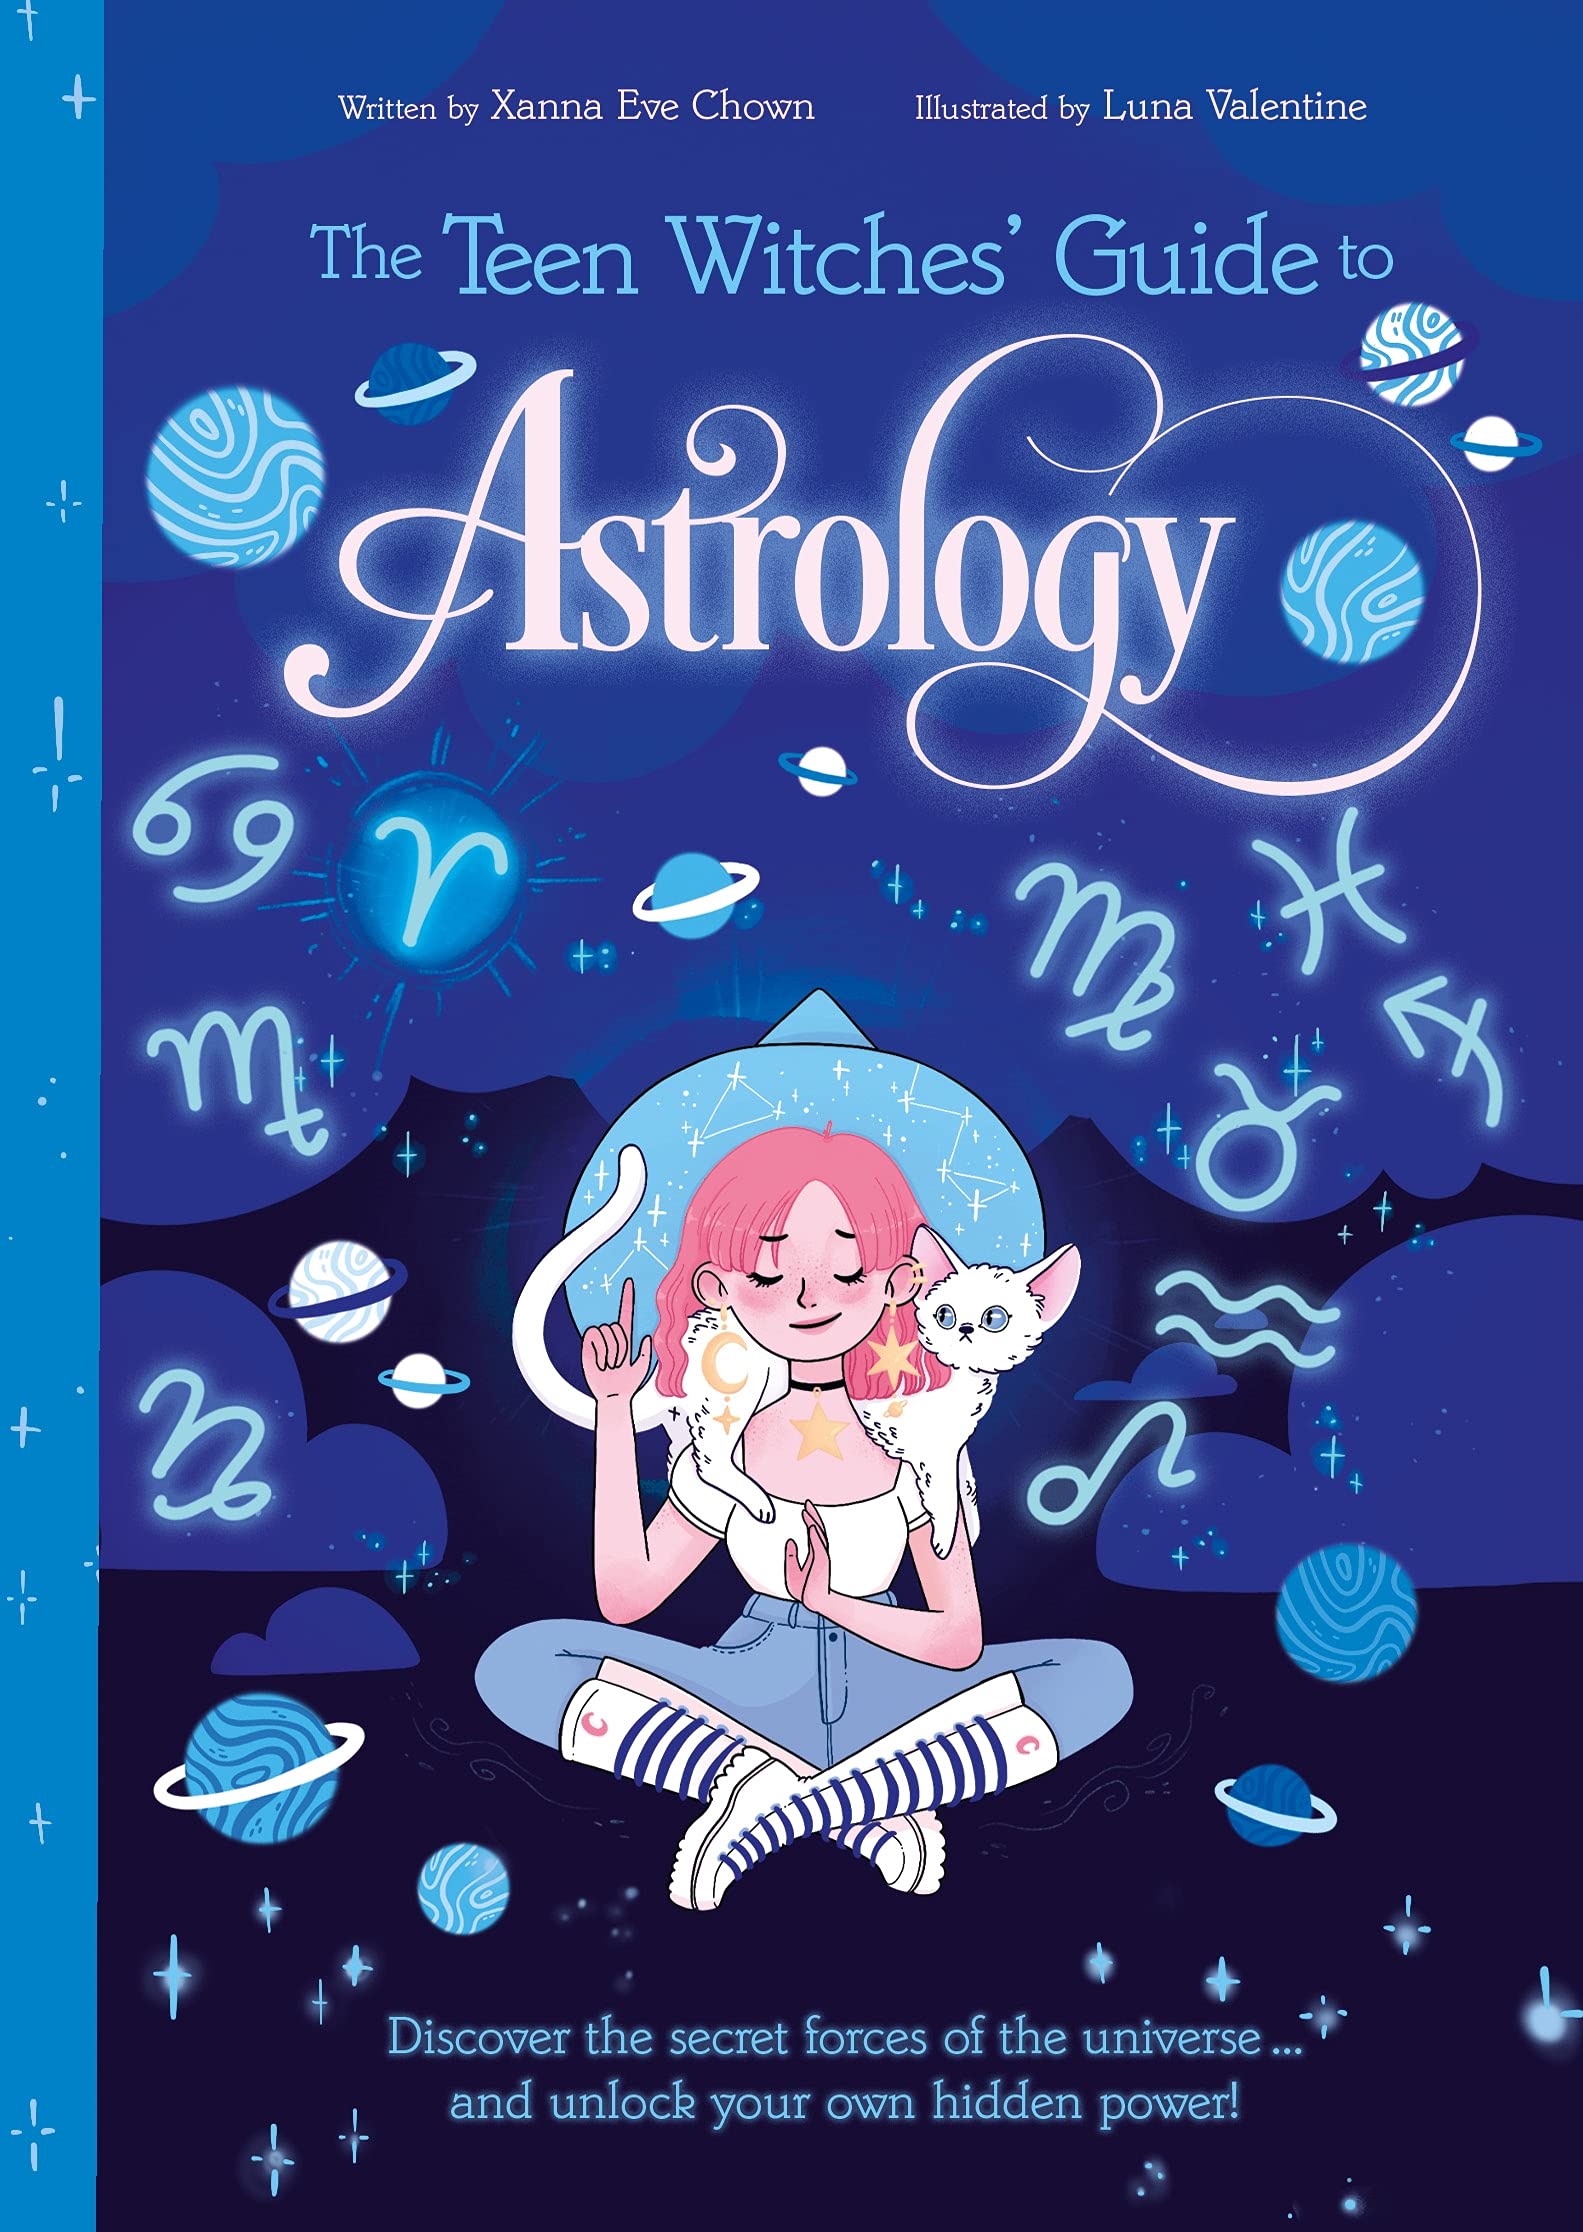 Teen Witches' Guide to Astrology by Chown & Williamson